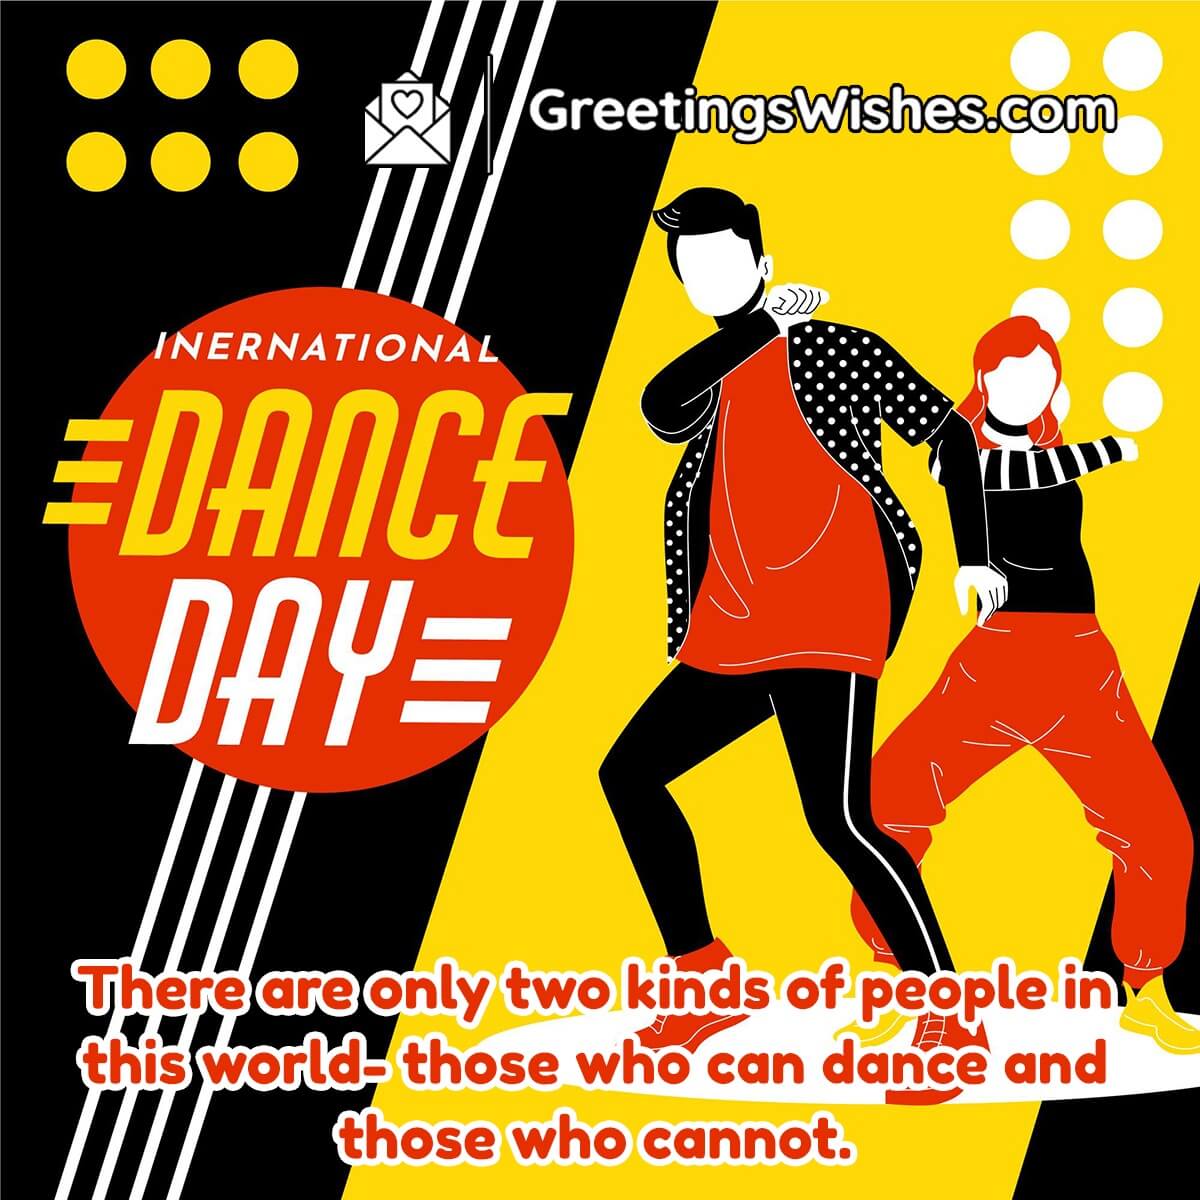 International Dance Day Quotes